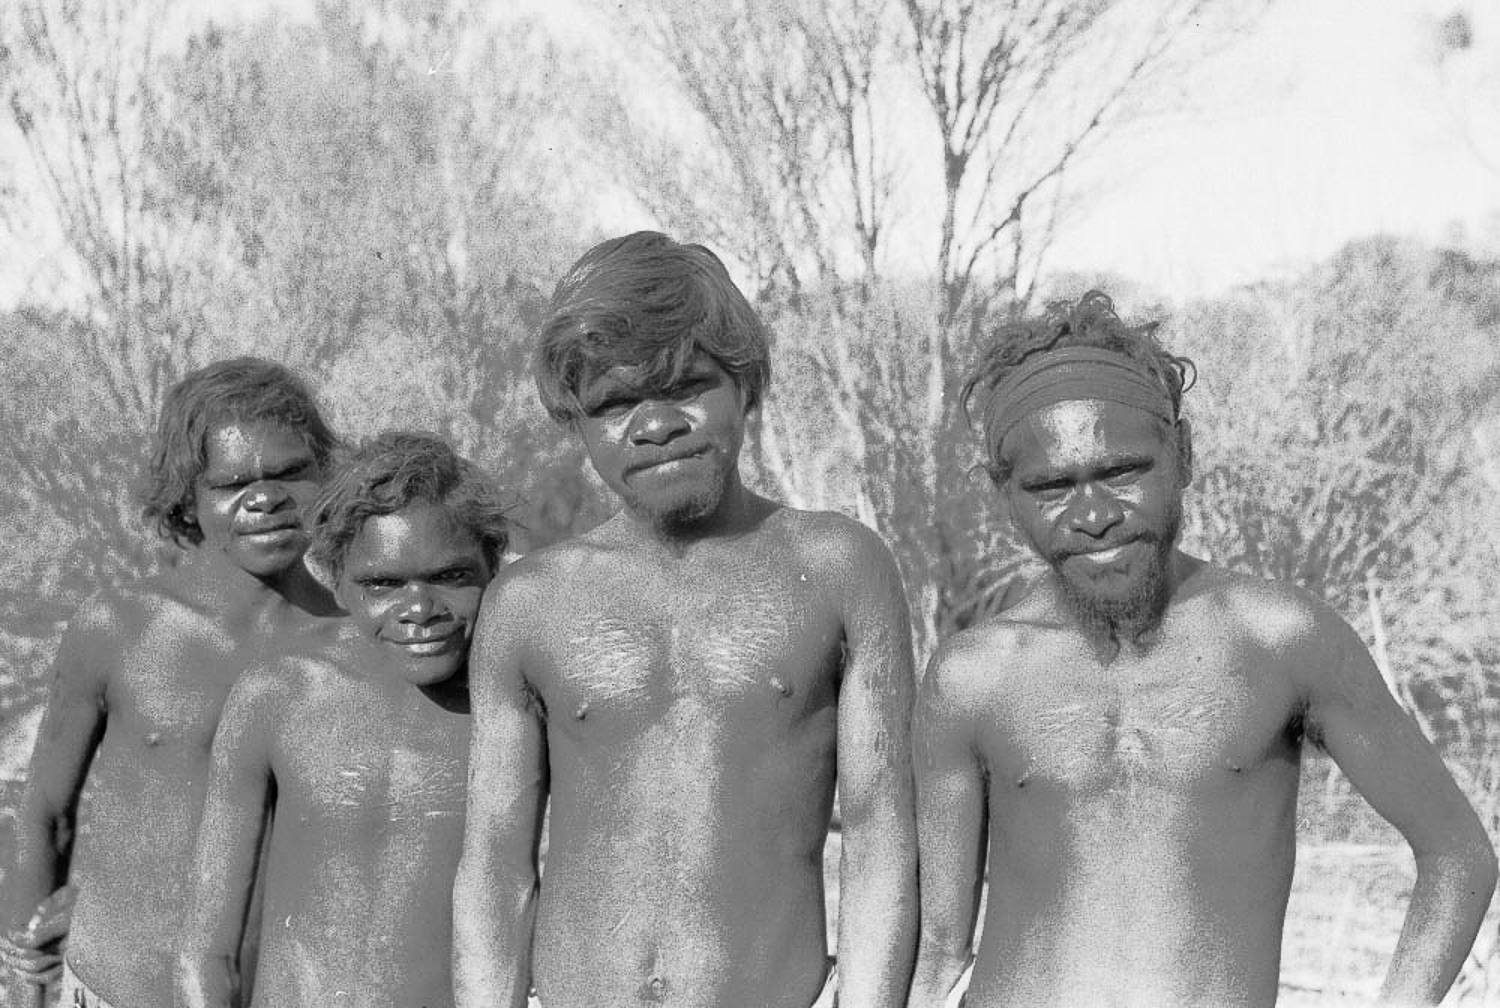 Tom Underwood, Bill Jamieson, Roy Underwood, Roger Jamieson after being ‘found’ on Spinifex Country, now called the Great Victoria Desert. In the early 1950s, many of the Spinifex People were still living traditional lifestyles deep in the remote desert; this was the first meeting with white people. Roy Underwood would eventually become an internationally recognised artist and would travel the world to tell the story of his people through art.